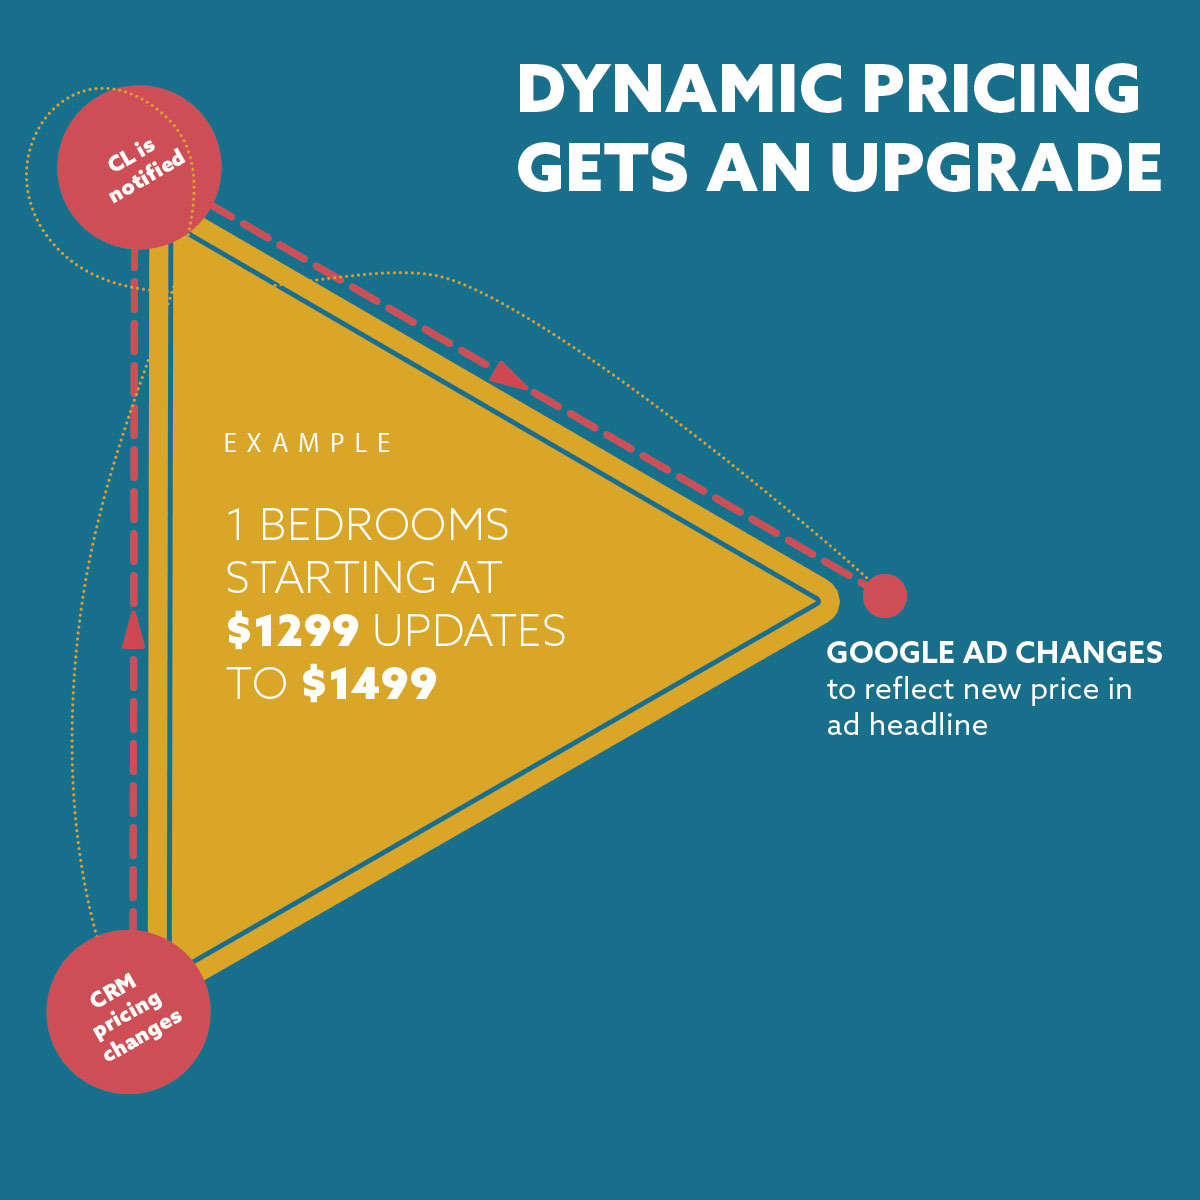 Dynamic Pricing Gets an Upgrade